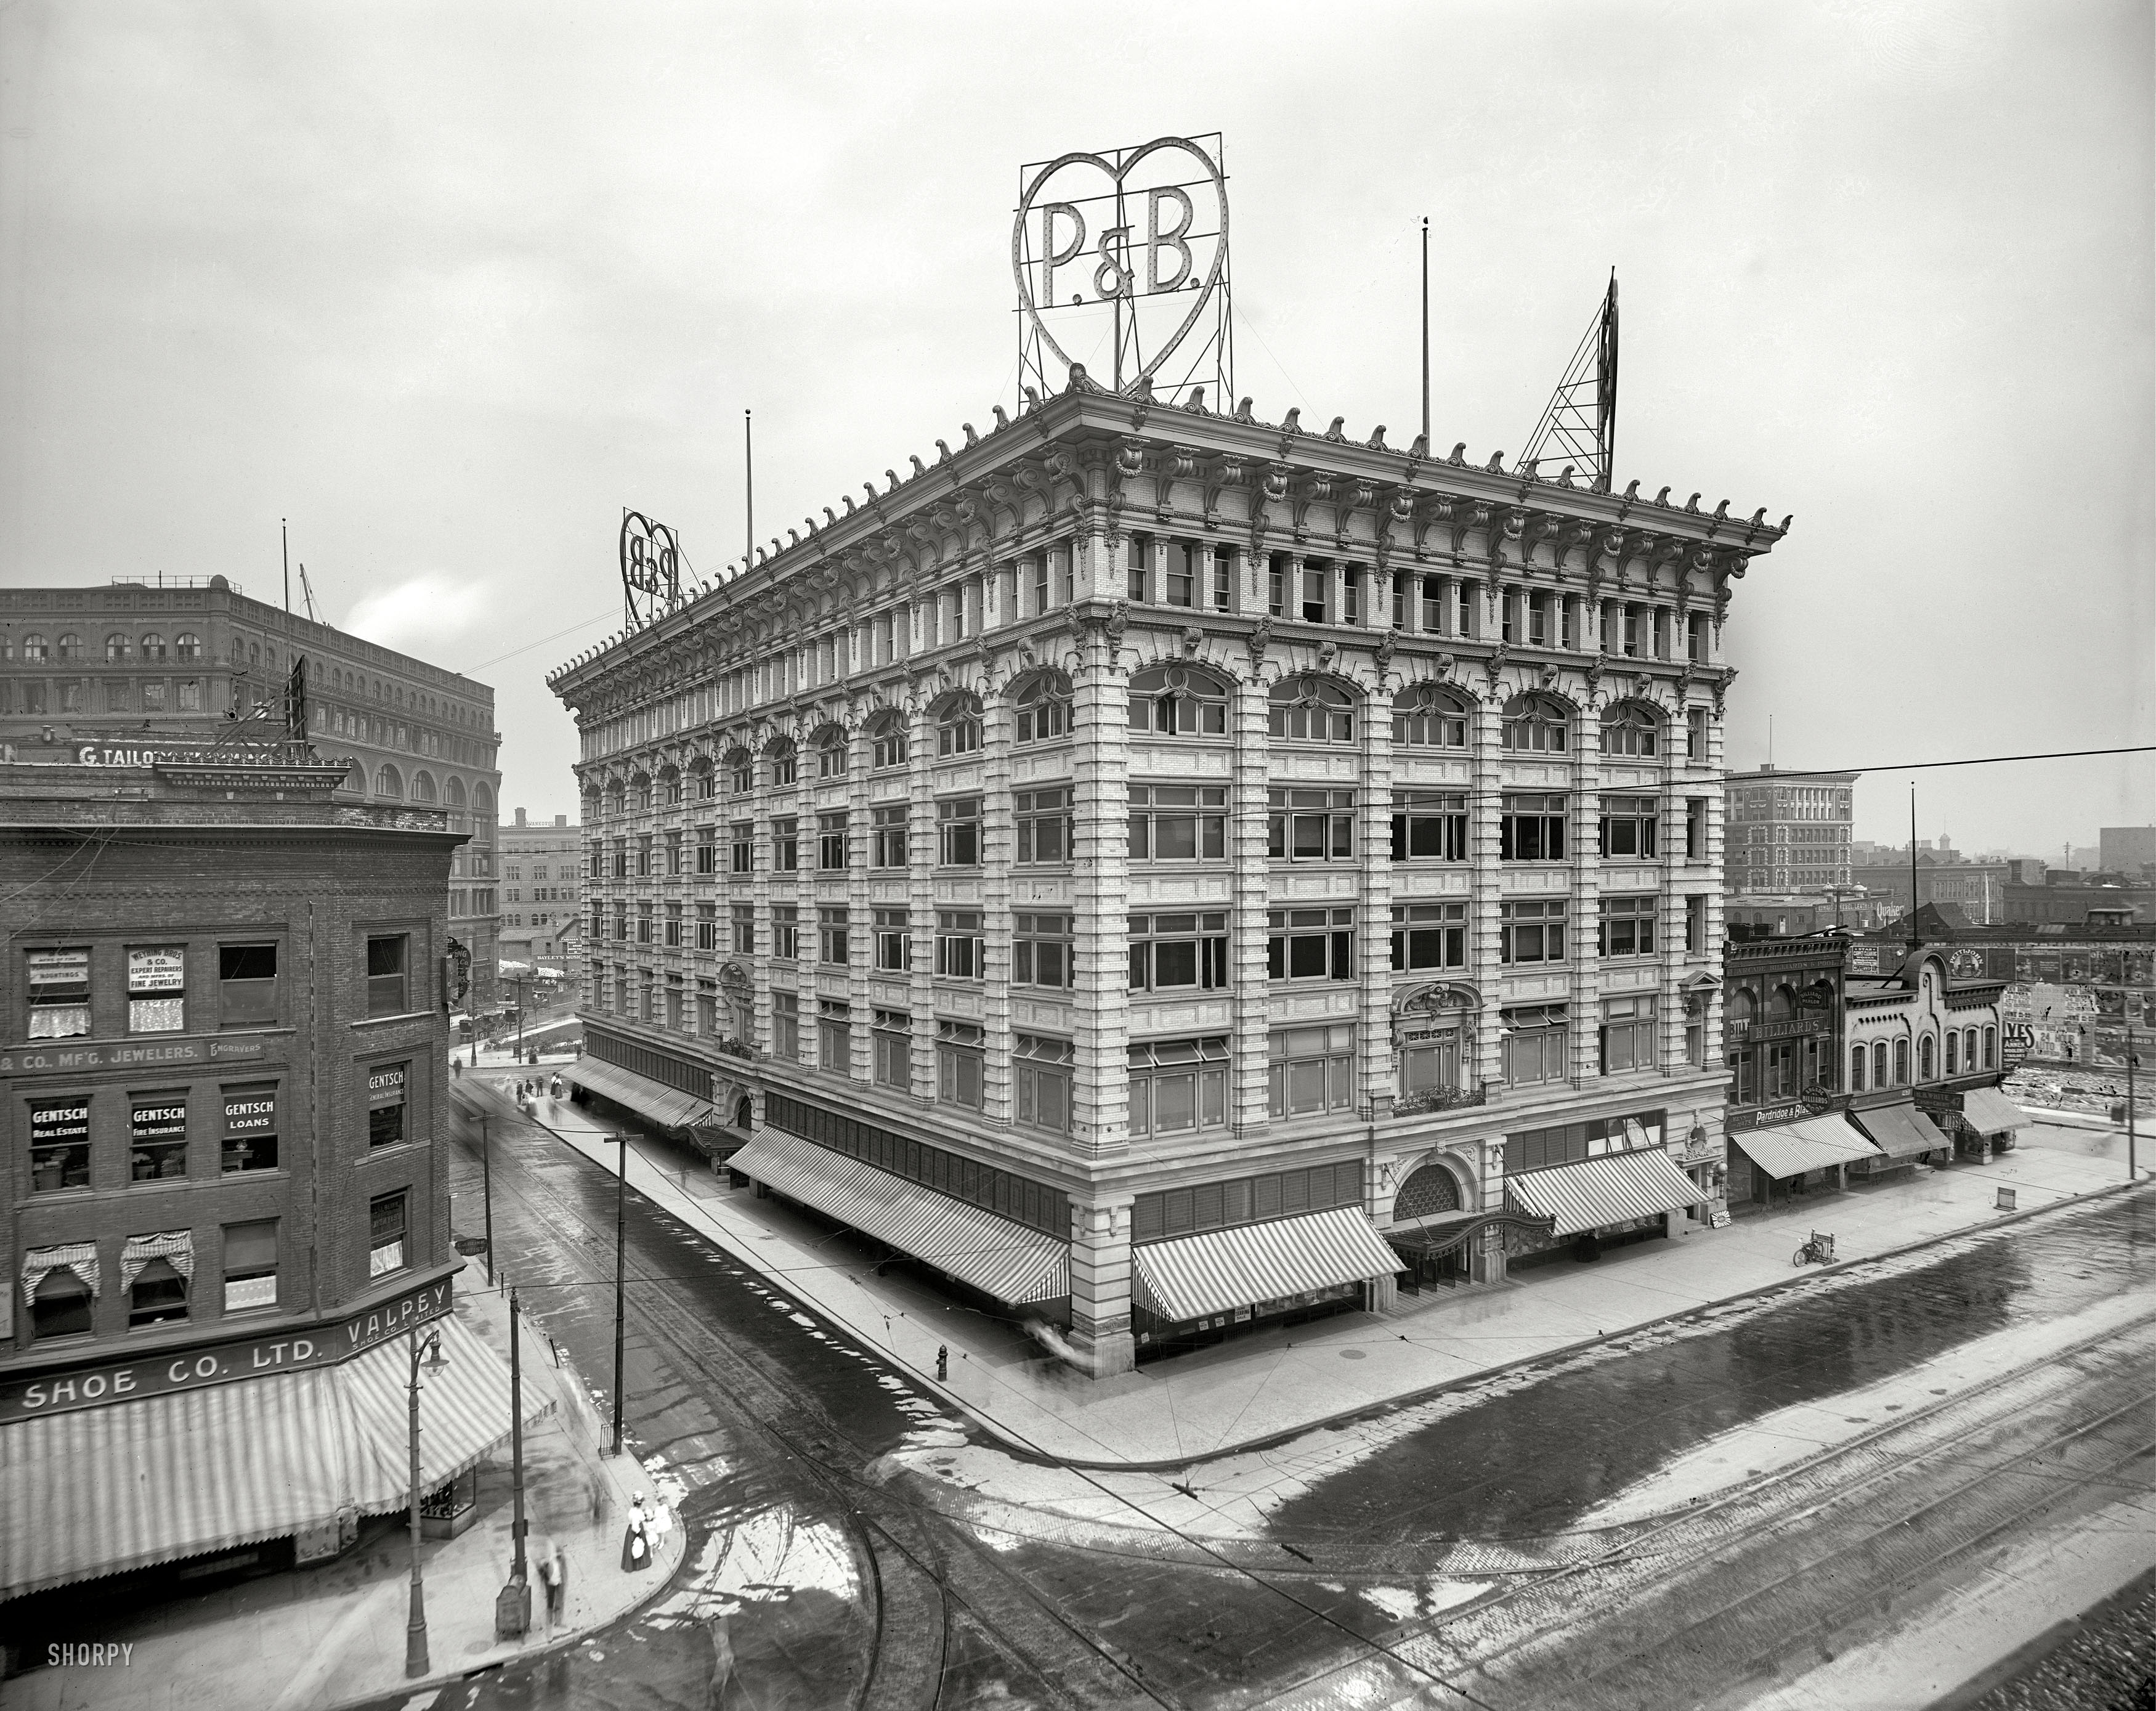 Detroit, Michigan, circa 1915. "Pardridge & Blackwell department store." Many interesting details lurking in the corners here; note the phantom streetcar on the left and  billboard advertising "Death-Daring Drivers" in a 24-hour auto race on the right. 8x10 inch glass negative, Detroit Publishing Company. View full size.